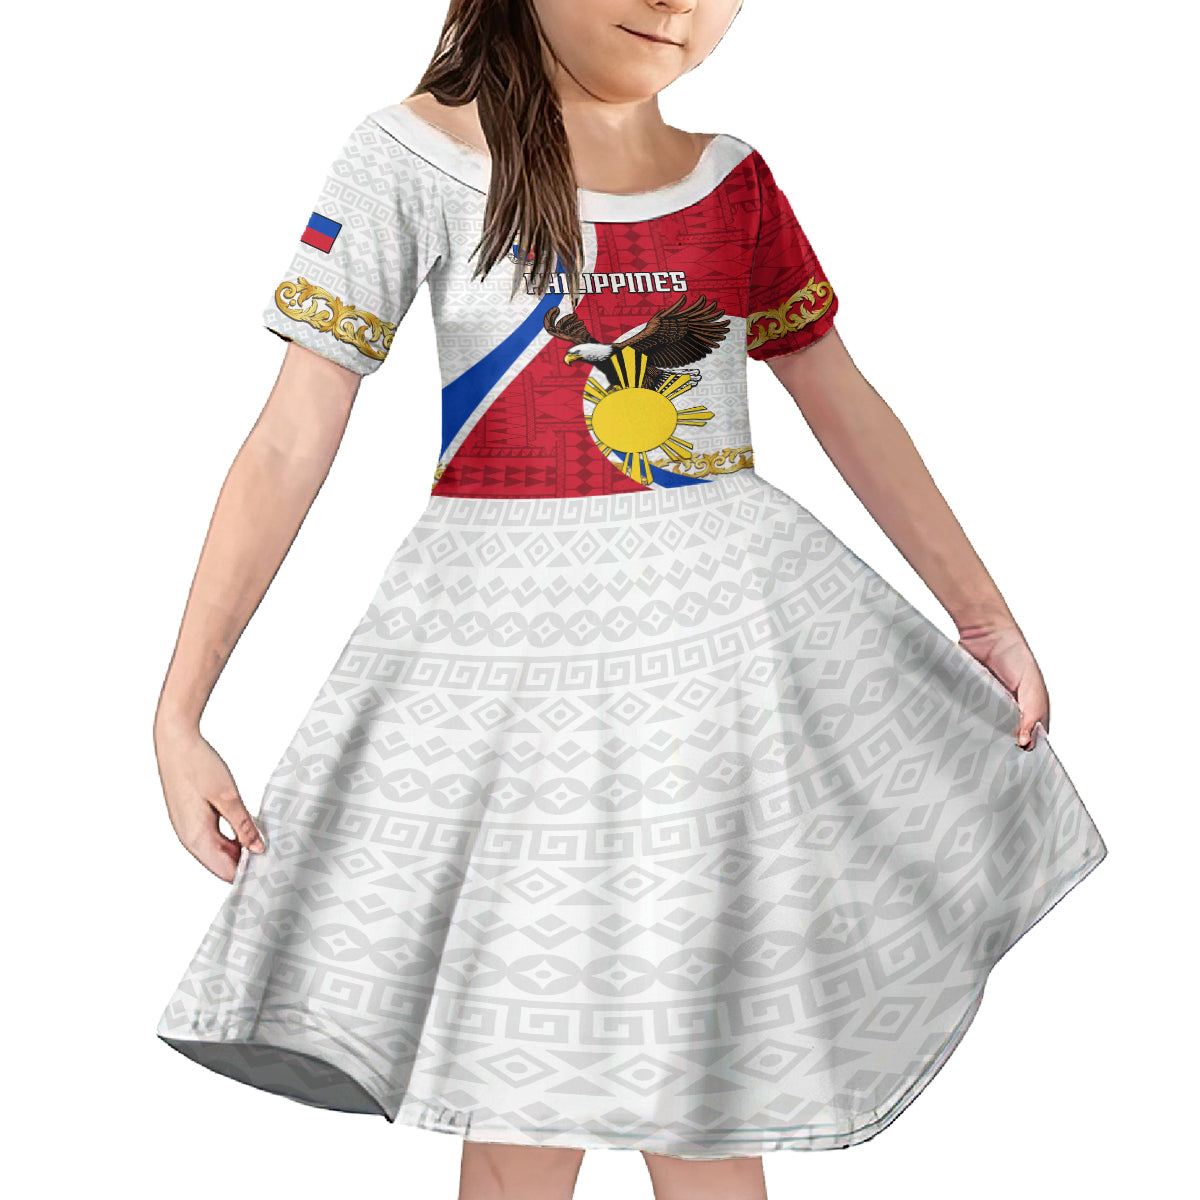 Personalized Philippines Kid Short Sleeve Dress The Eight-Rayed Sun Bald Eagle Polynesian Pattern LT05 KID Red - Polynesian Pride